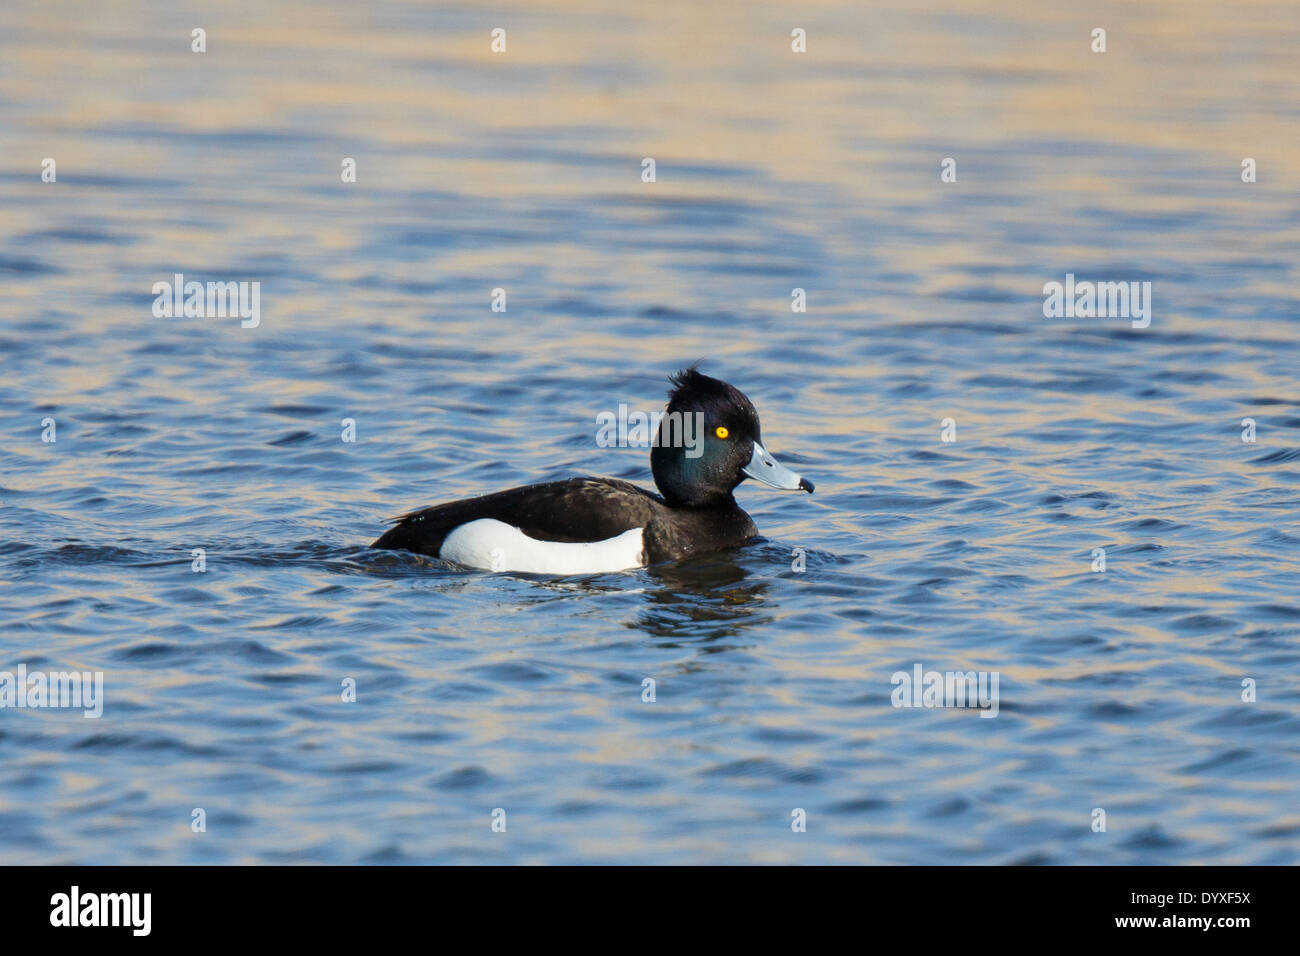 Tufted Duck Stock Photo